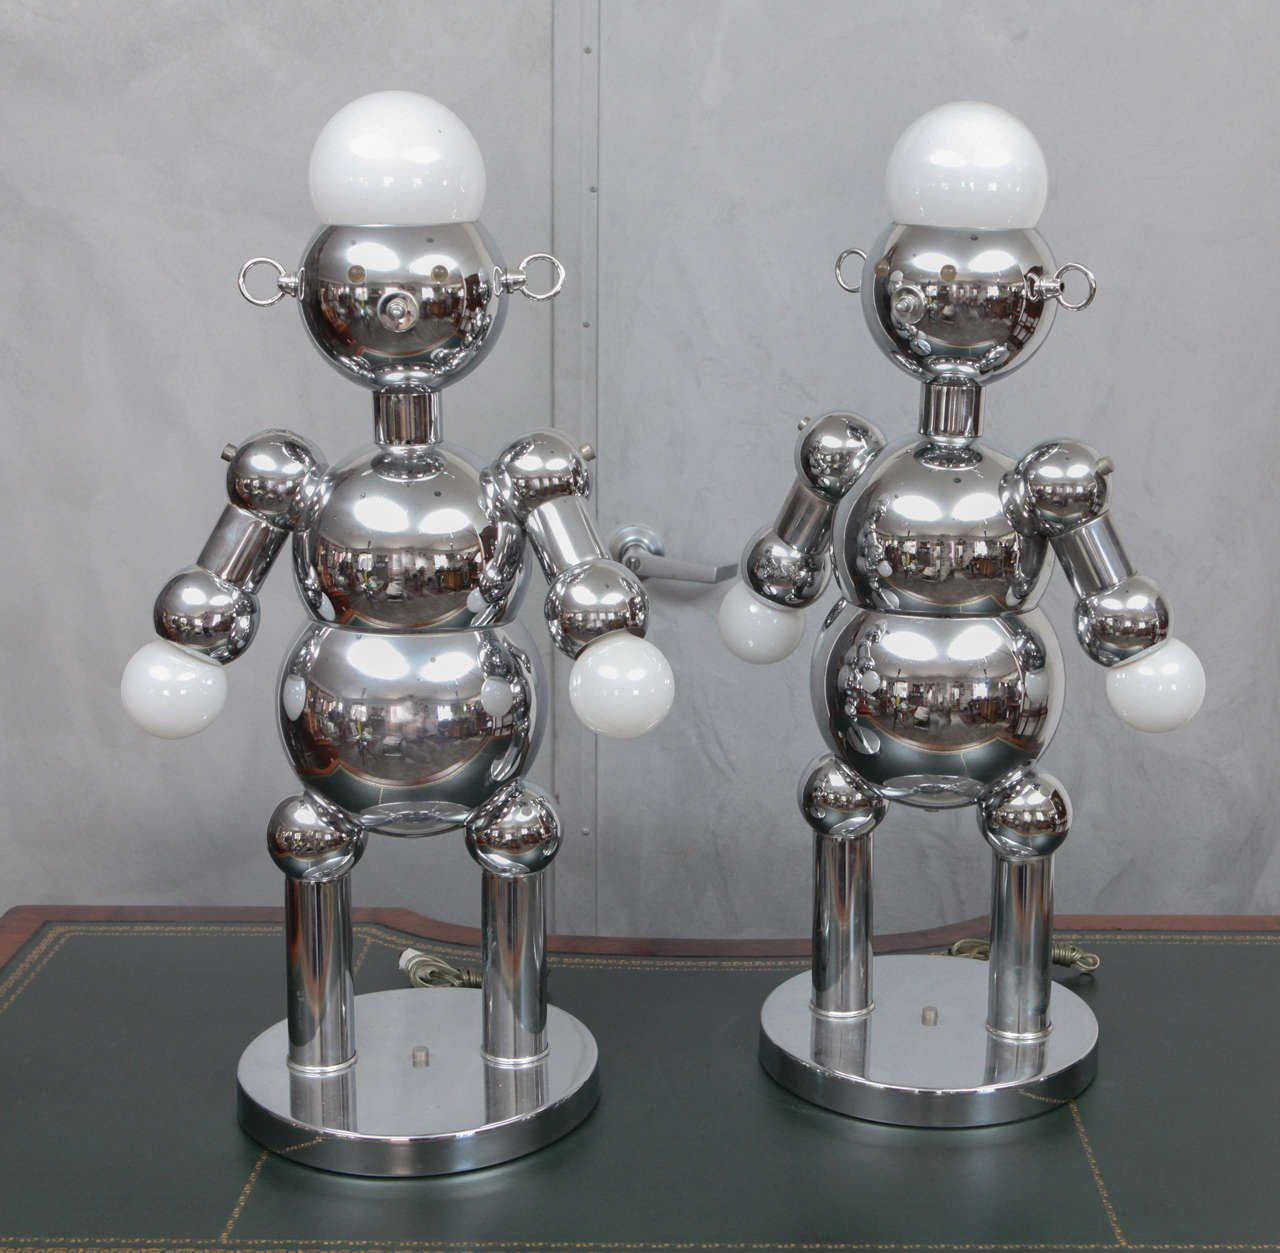 This is a fantastic, whimsical pair of Italian Figural Chrome Robot Table Lamps by Torino Lamp Co. made in the 1970's as a part of a series of multiple characters and scales of robot lamps. These two are larger than alot of the pieces found. This